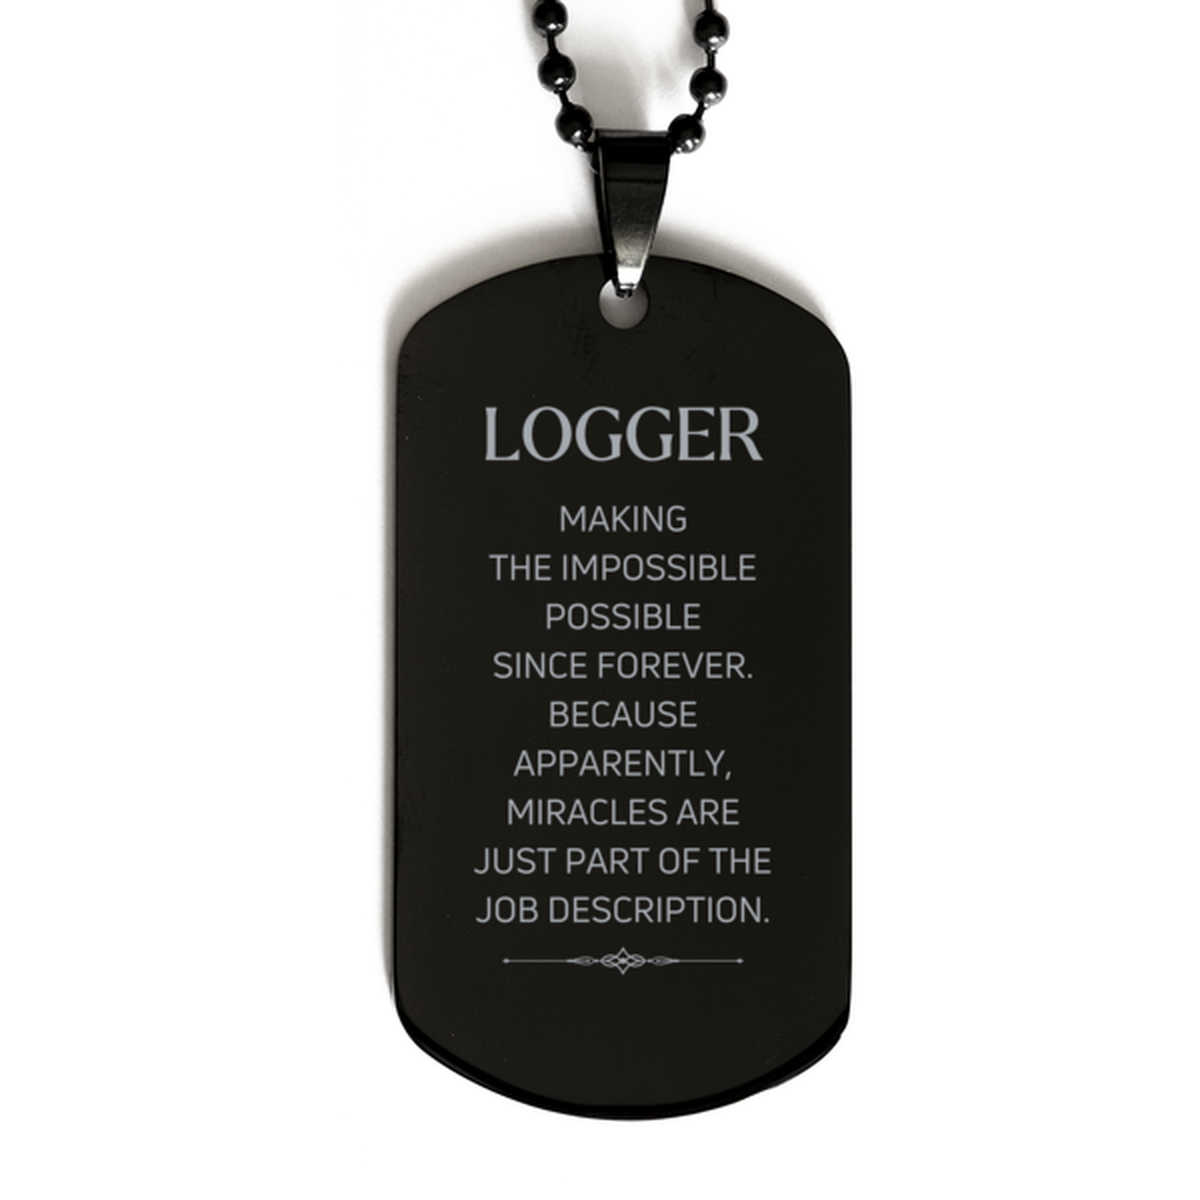 Funny Logger Gifts, Miracles are just part of the job description, Inspirational Birthday Black Dog Tag For Logger, Men, Women, Coworkers, Friends, Boss